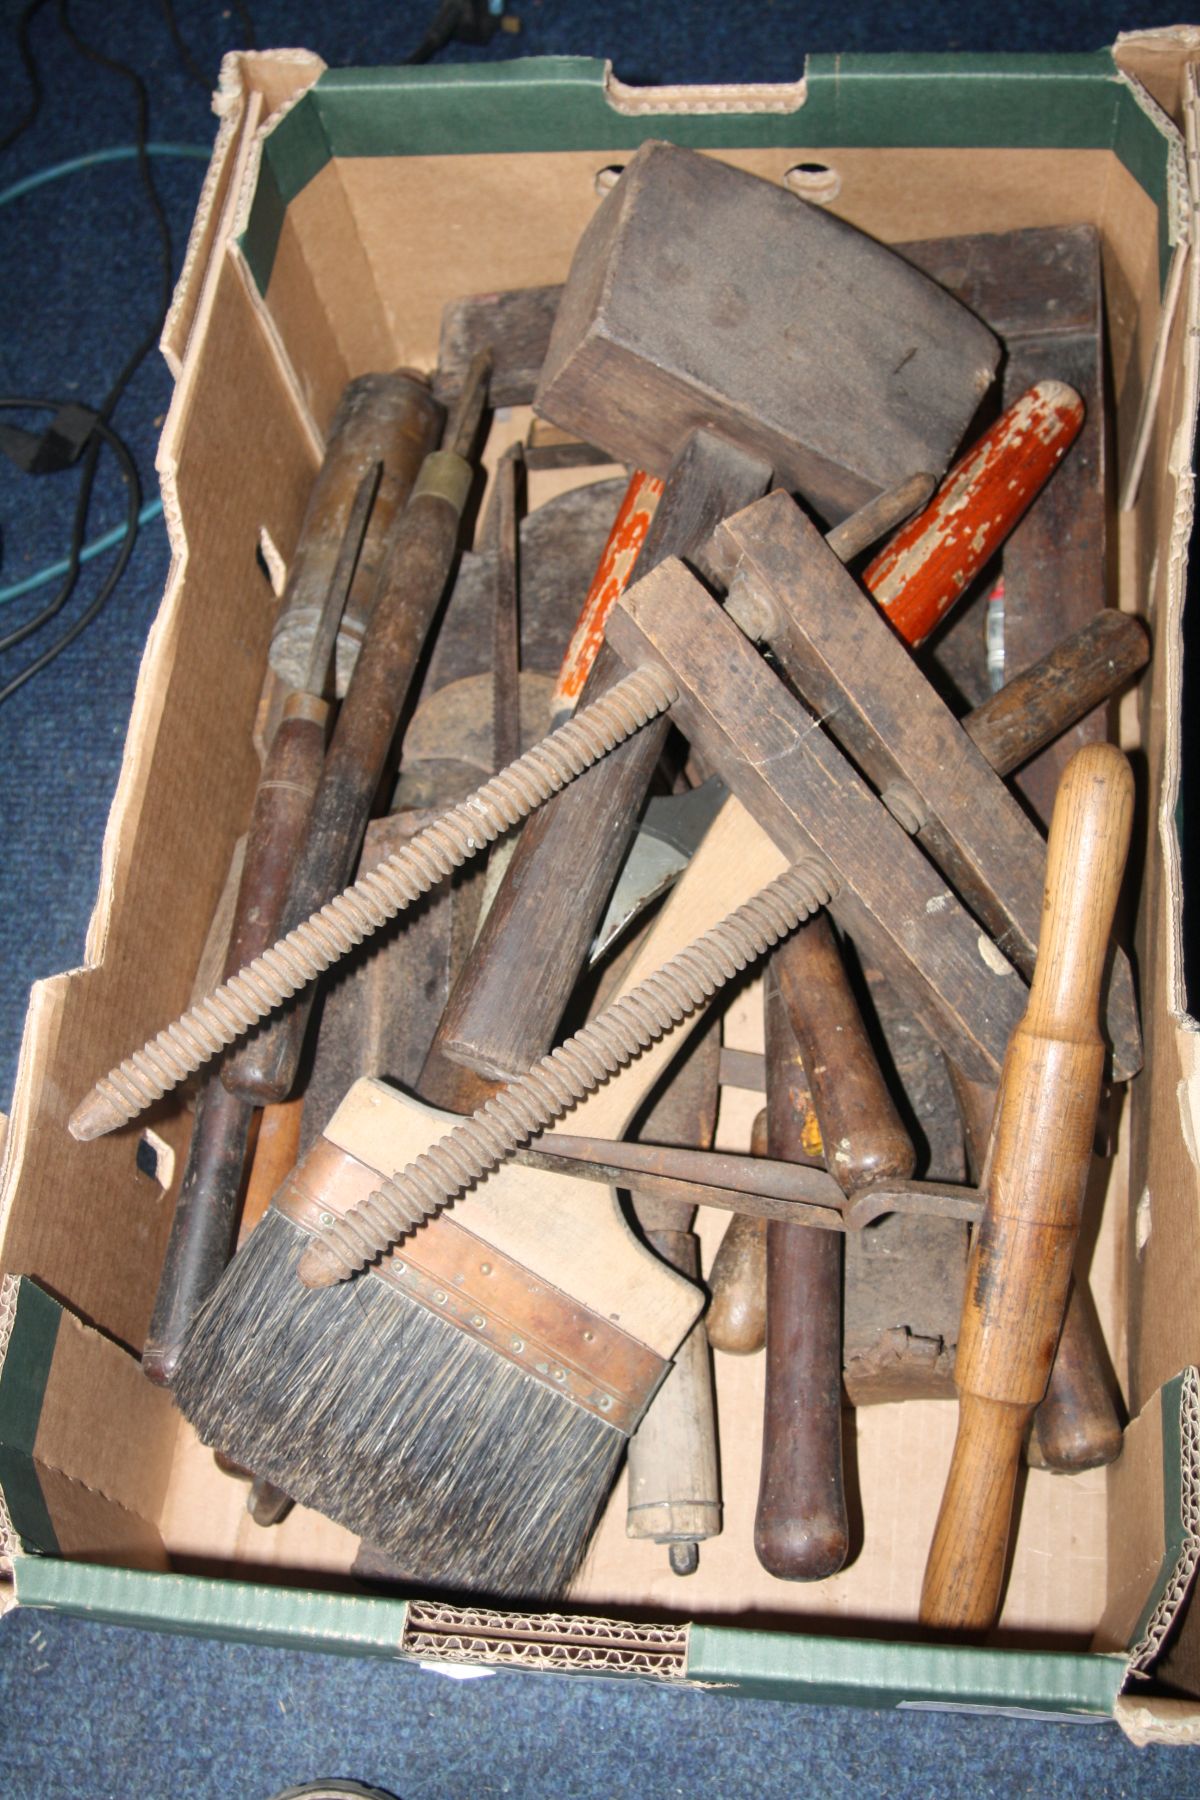 FIVE BOXES OF VARIOUS HAND TOOLS, to include planes, saws, hand sythes, files, chizels, hammers, - Image 6 of 14